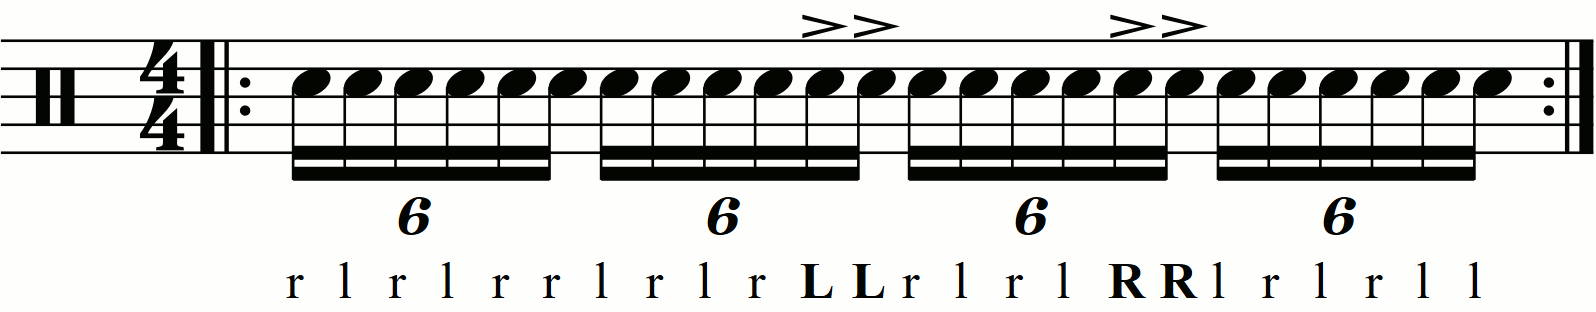 Accenting a double paradiddle